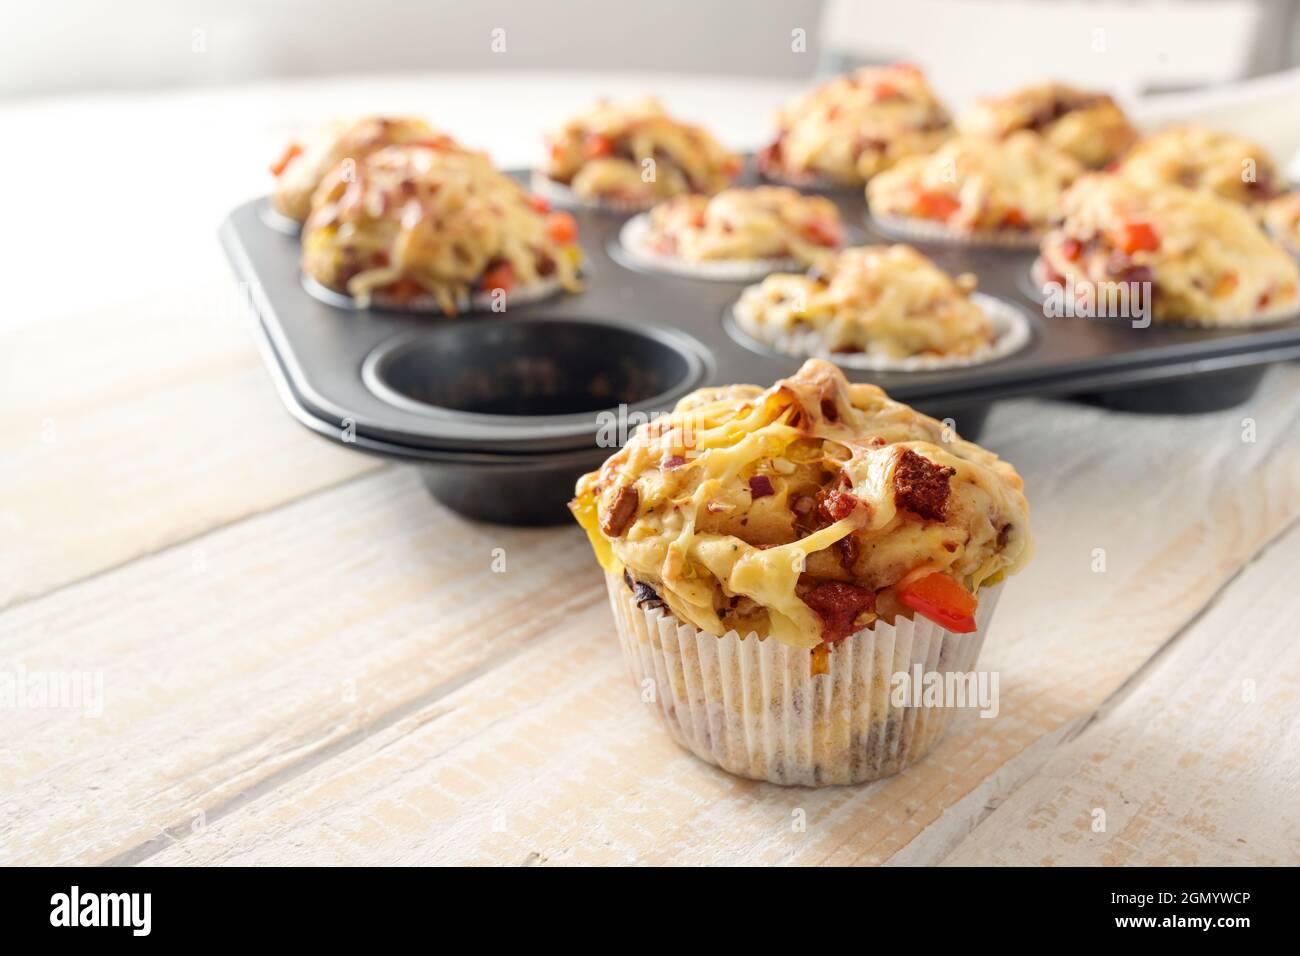 Tasty baked pizza muffins as finger food for a party from yeast dough, tomatoes, vegetables, sausage and cheese on a wooden table, copy space, selecte Stock Photo